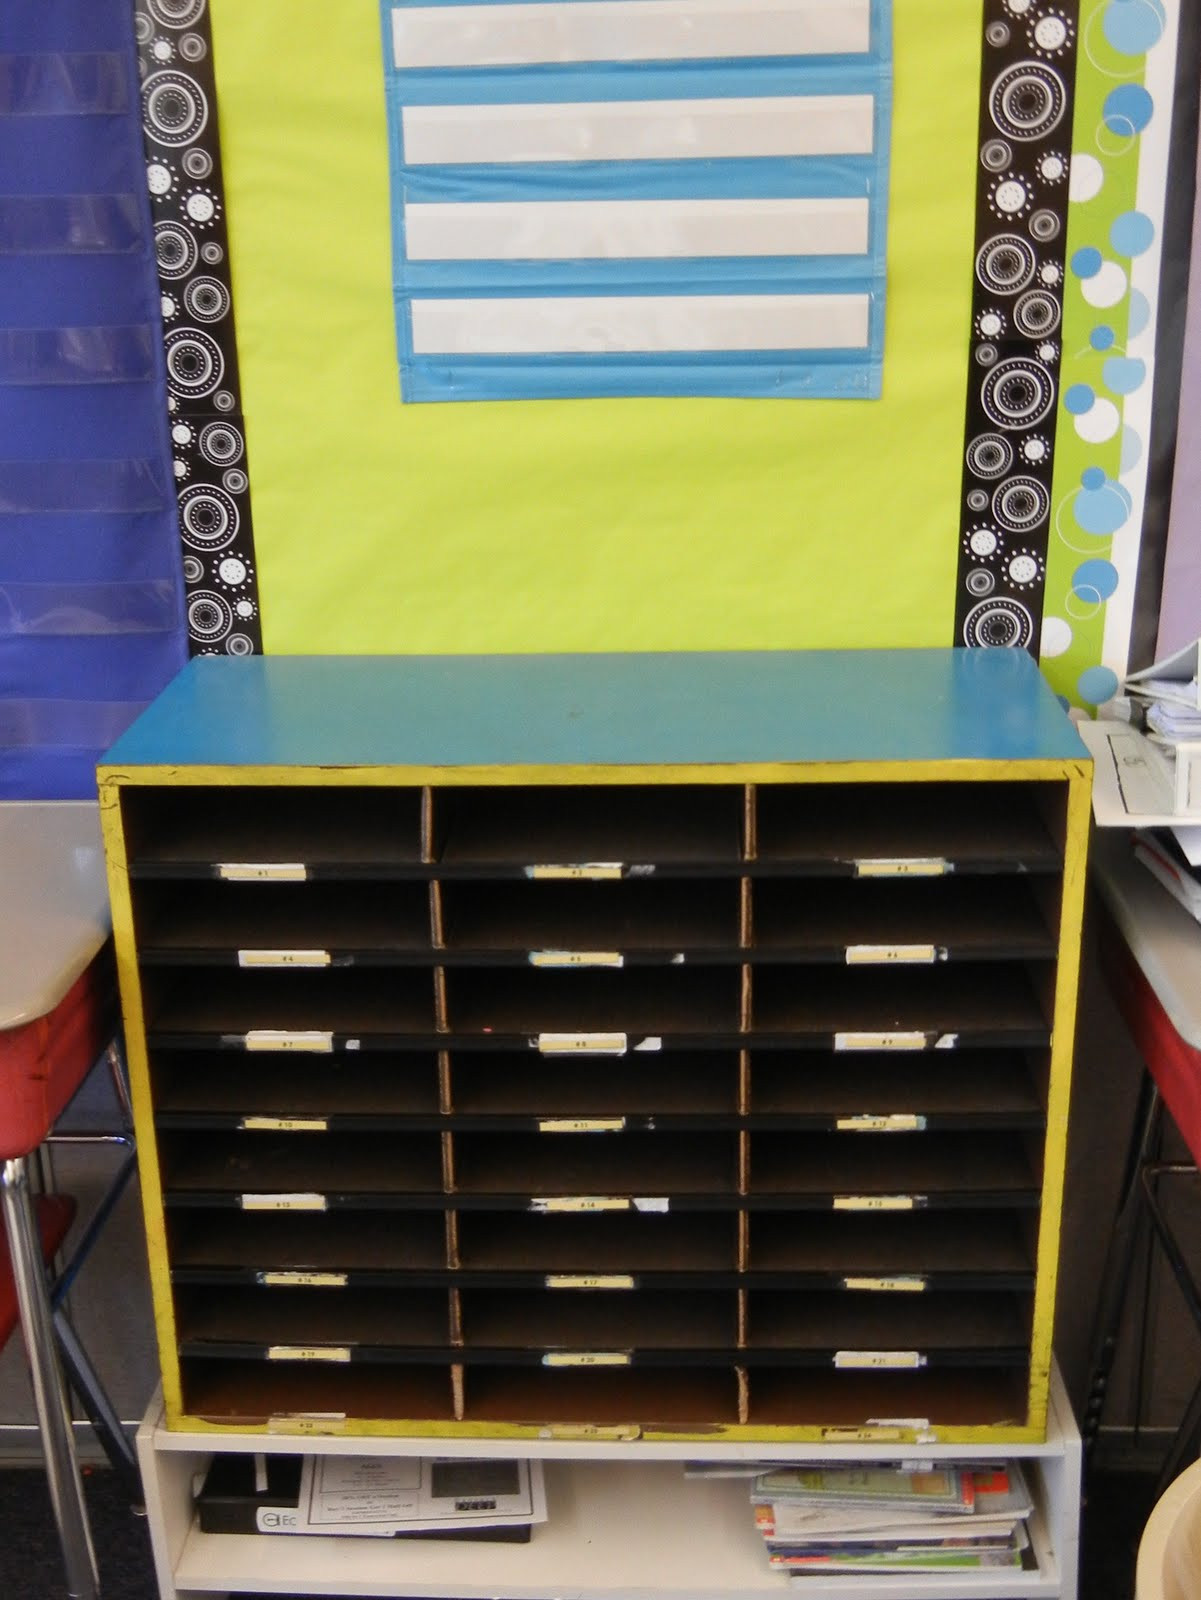 DIY Classroom Mailbox
 Ideas for Cheap and Easy STUDENT MAILBOXES in the